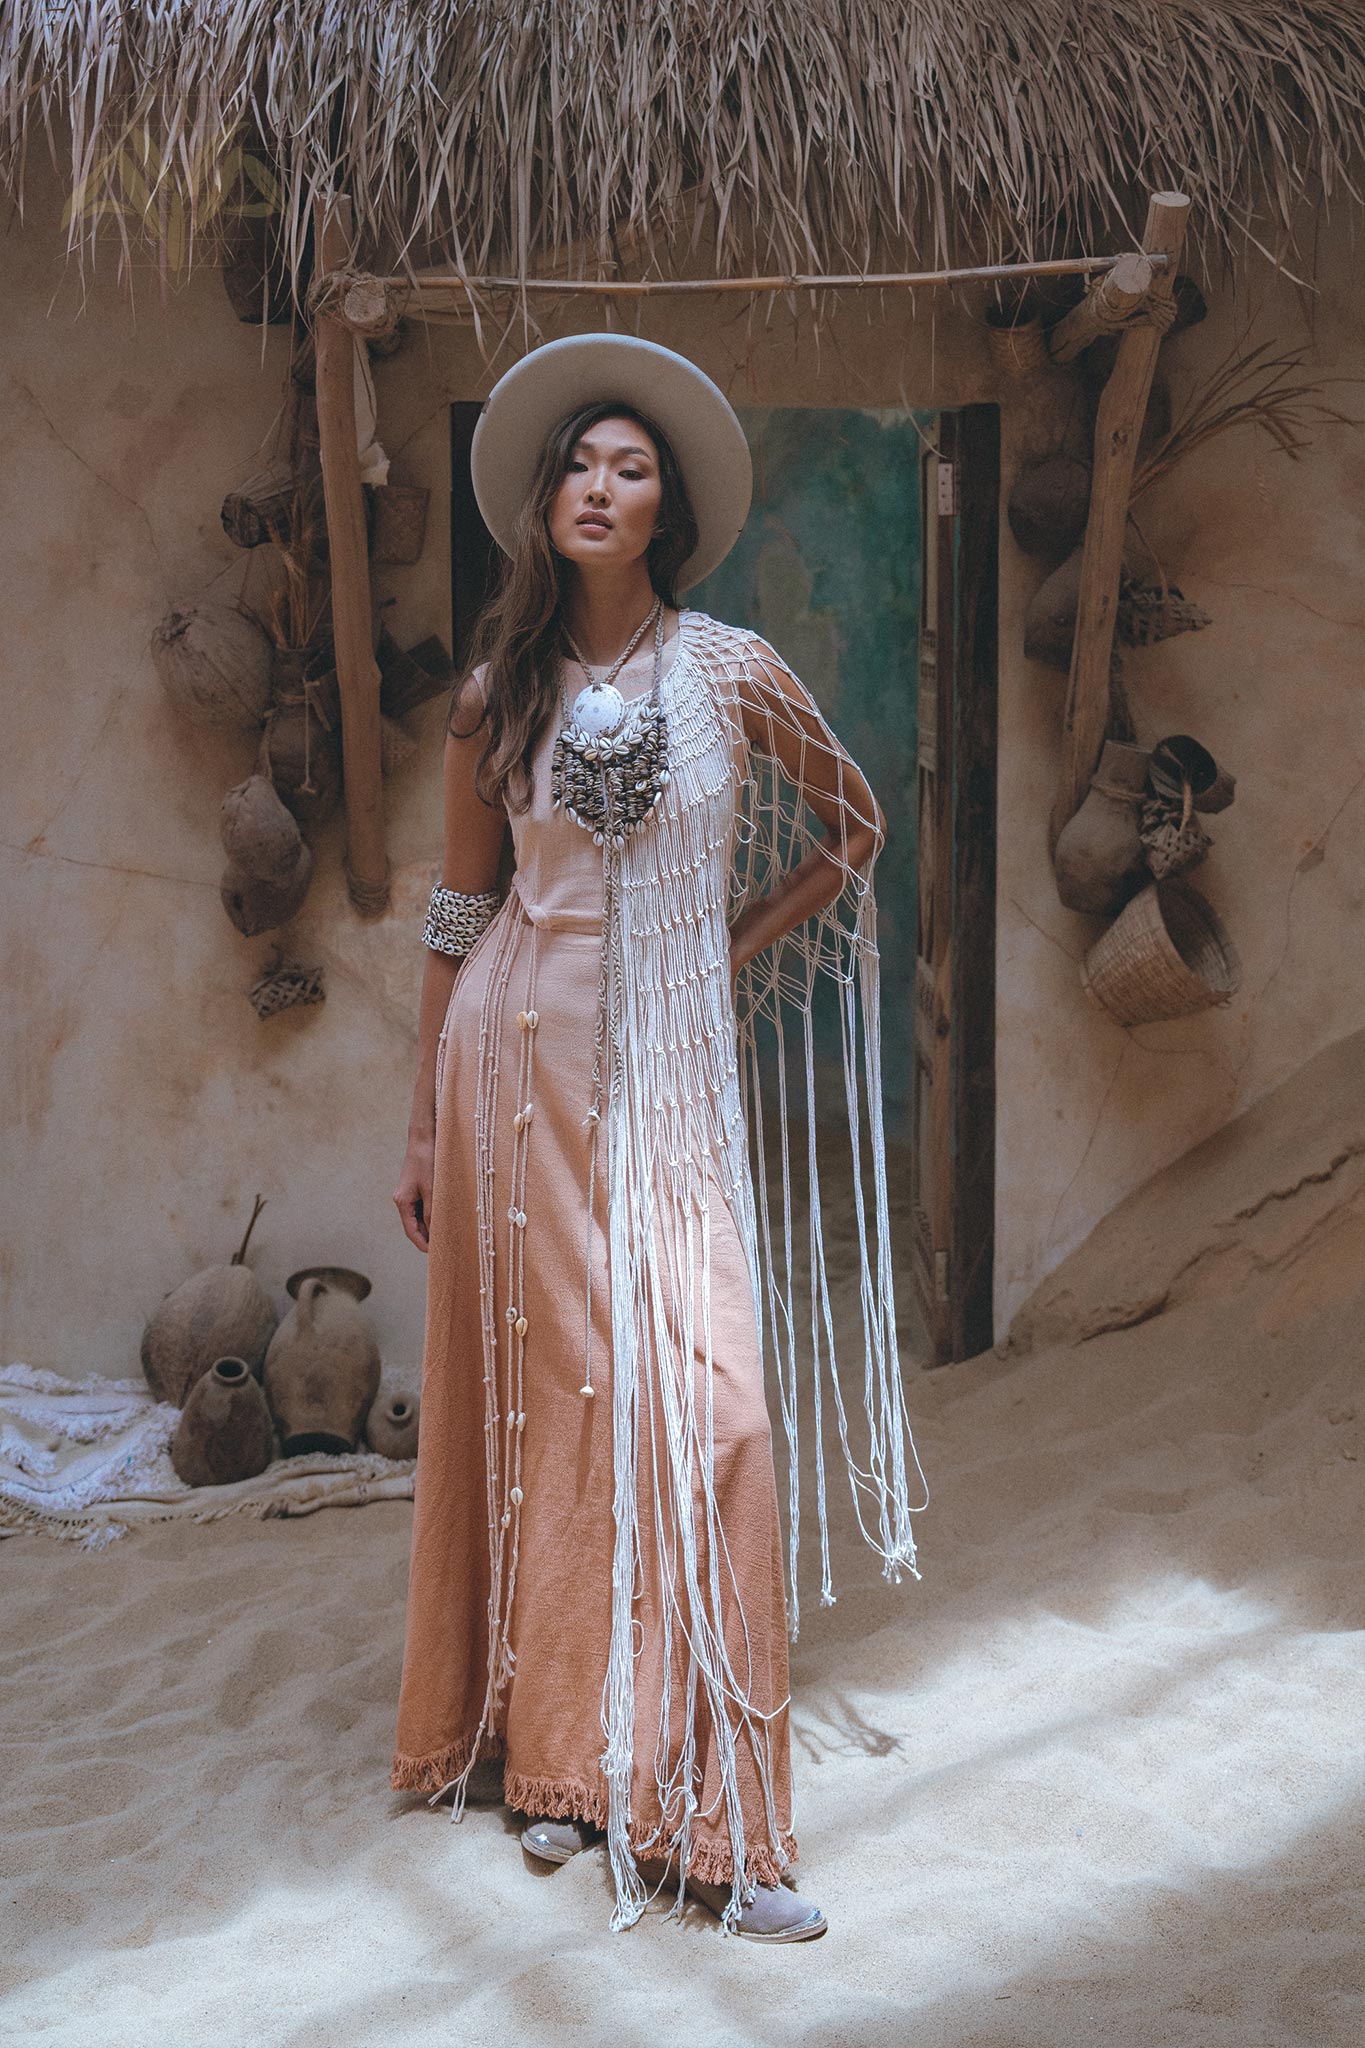 Get ready to soak up the sun in an Off-White Summer Net Cover Up from Aya Sacred Wear.